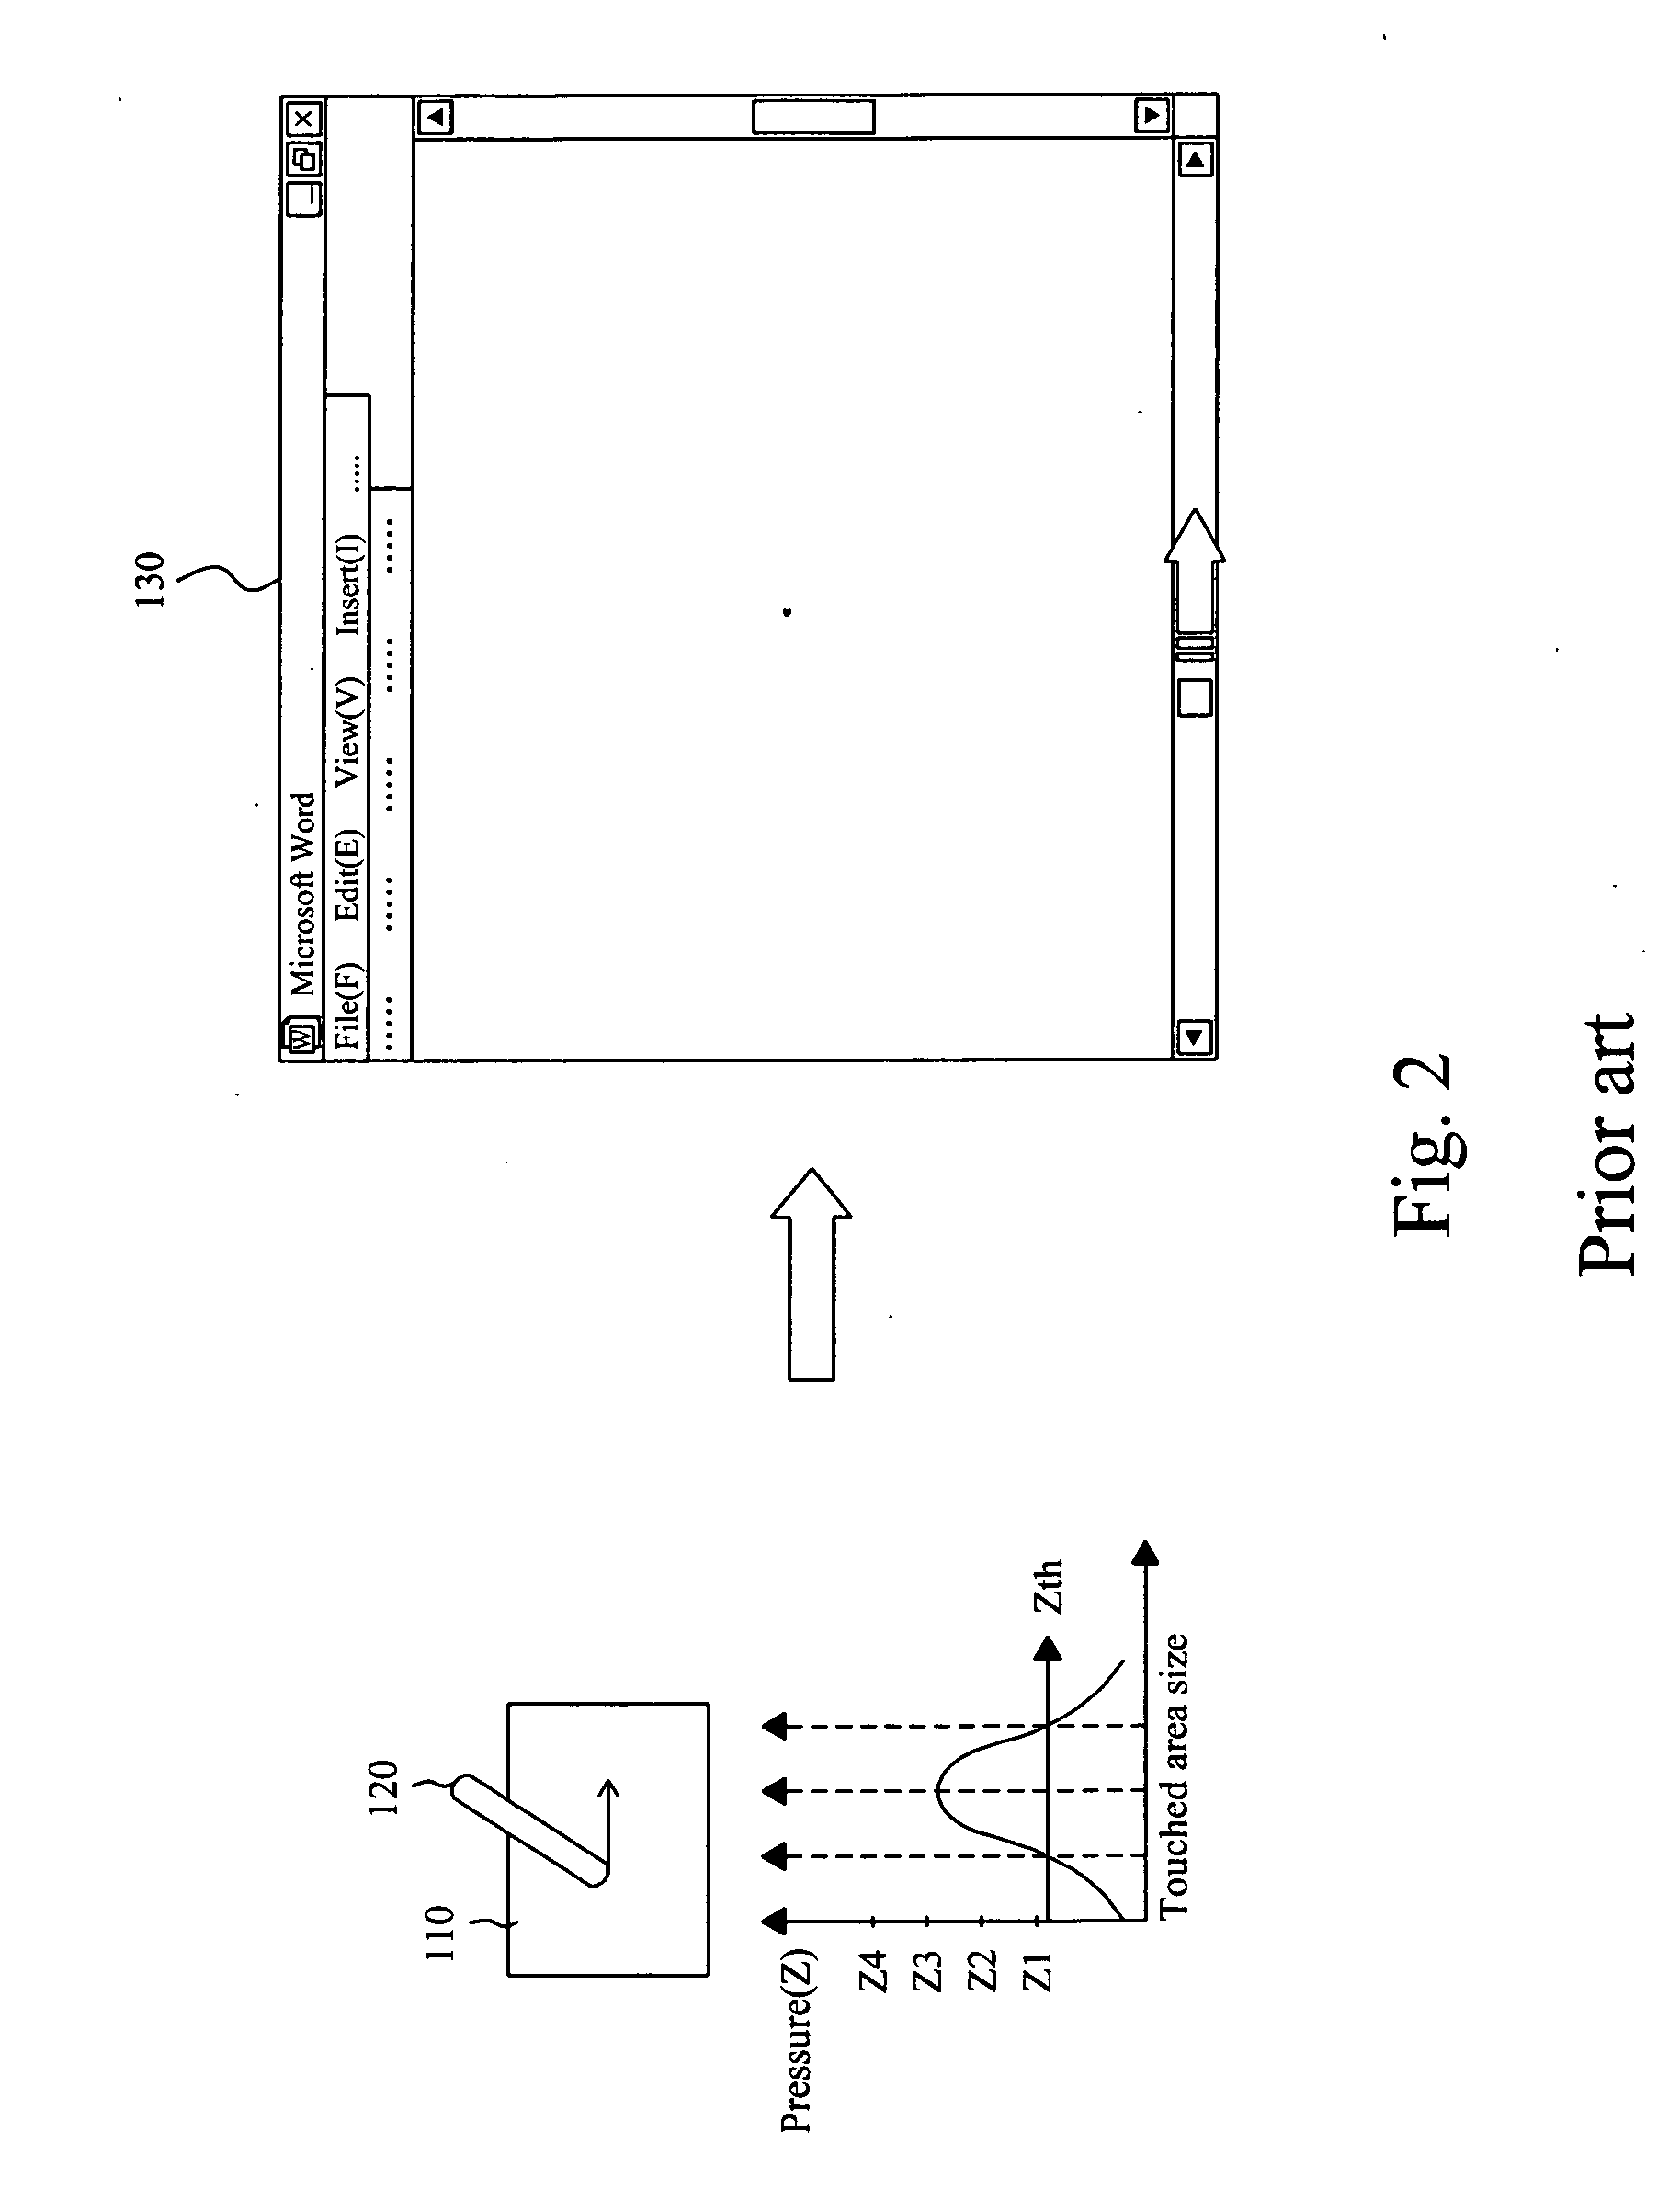 Method for window movement control on a touchpad having a touch-sense defined speed